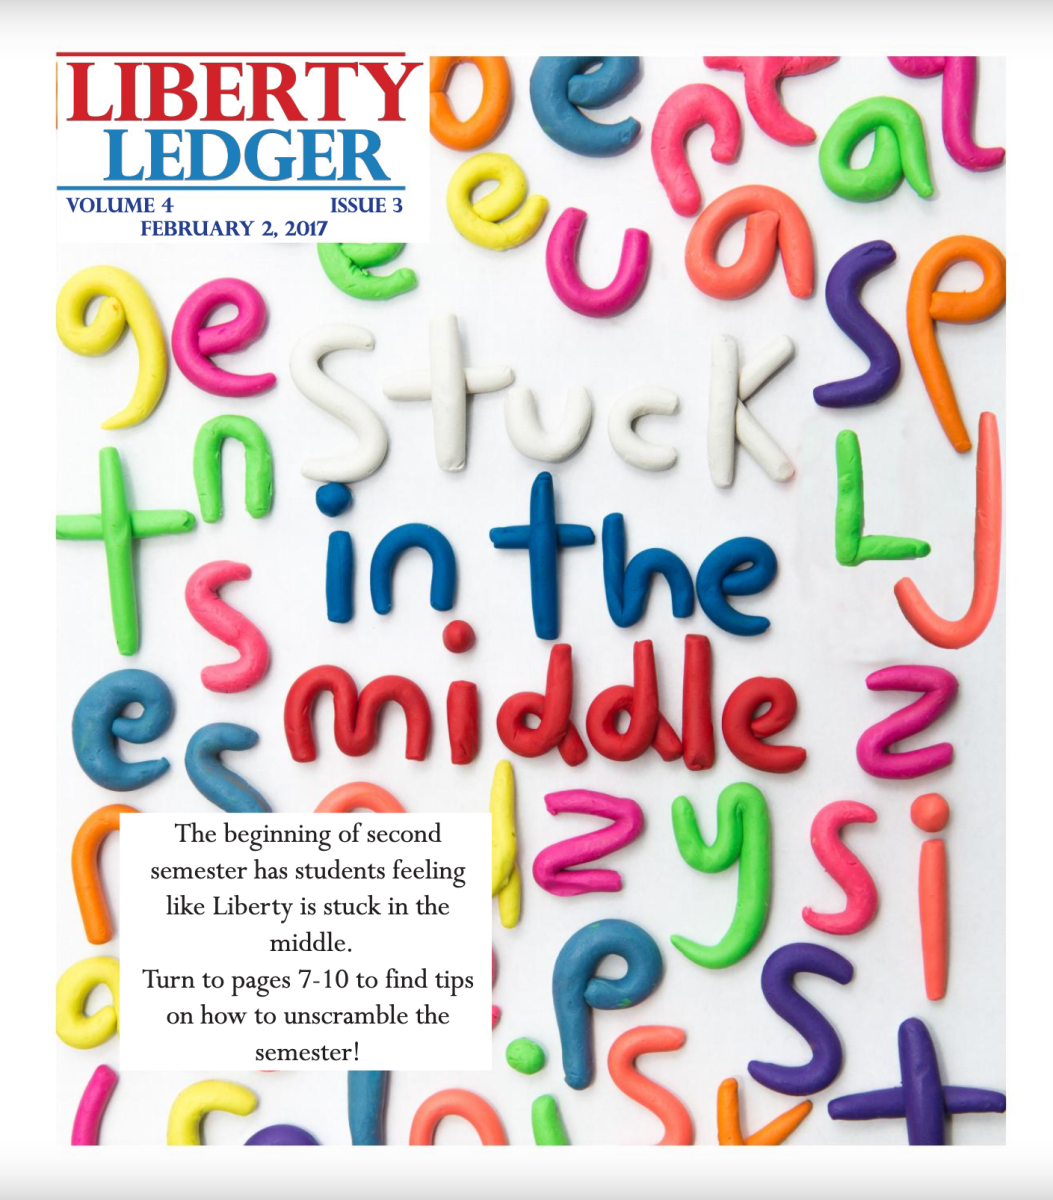 The Ledger Volume 4 Issue 3: Stuck in the Middle